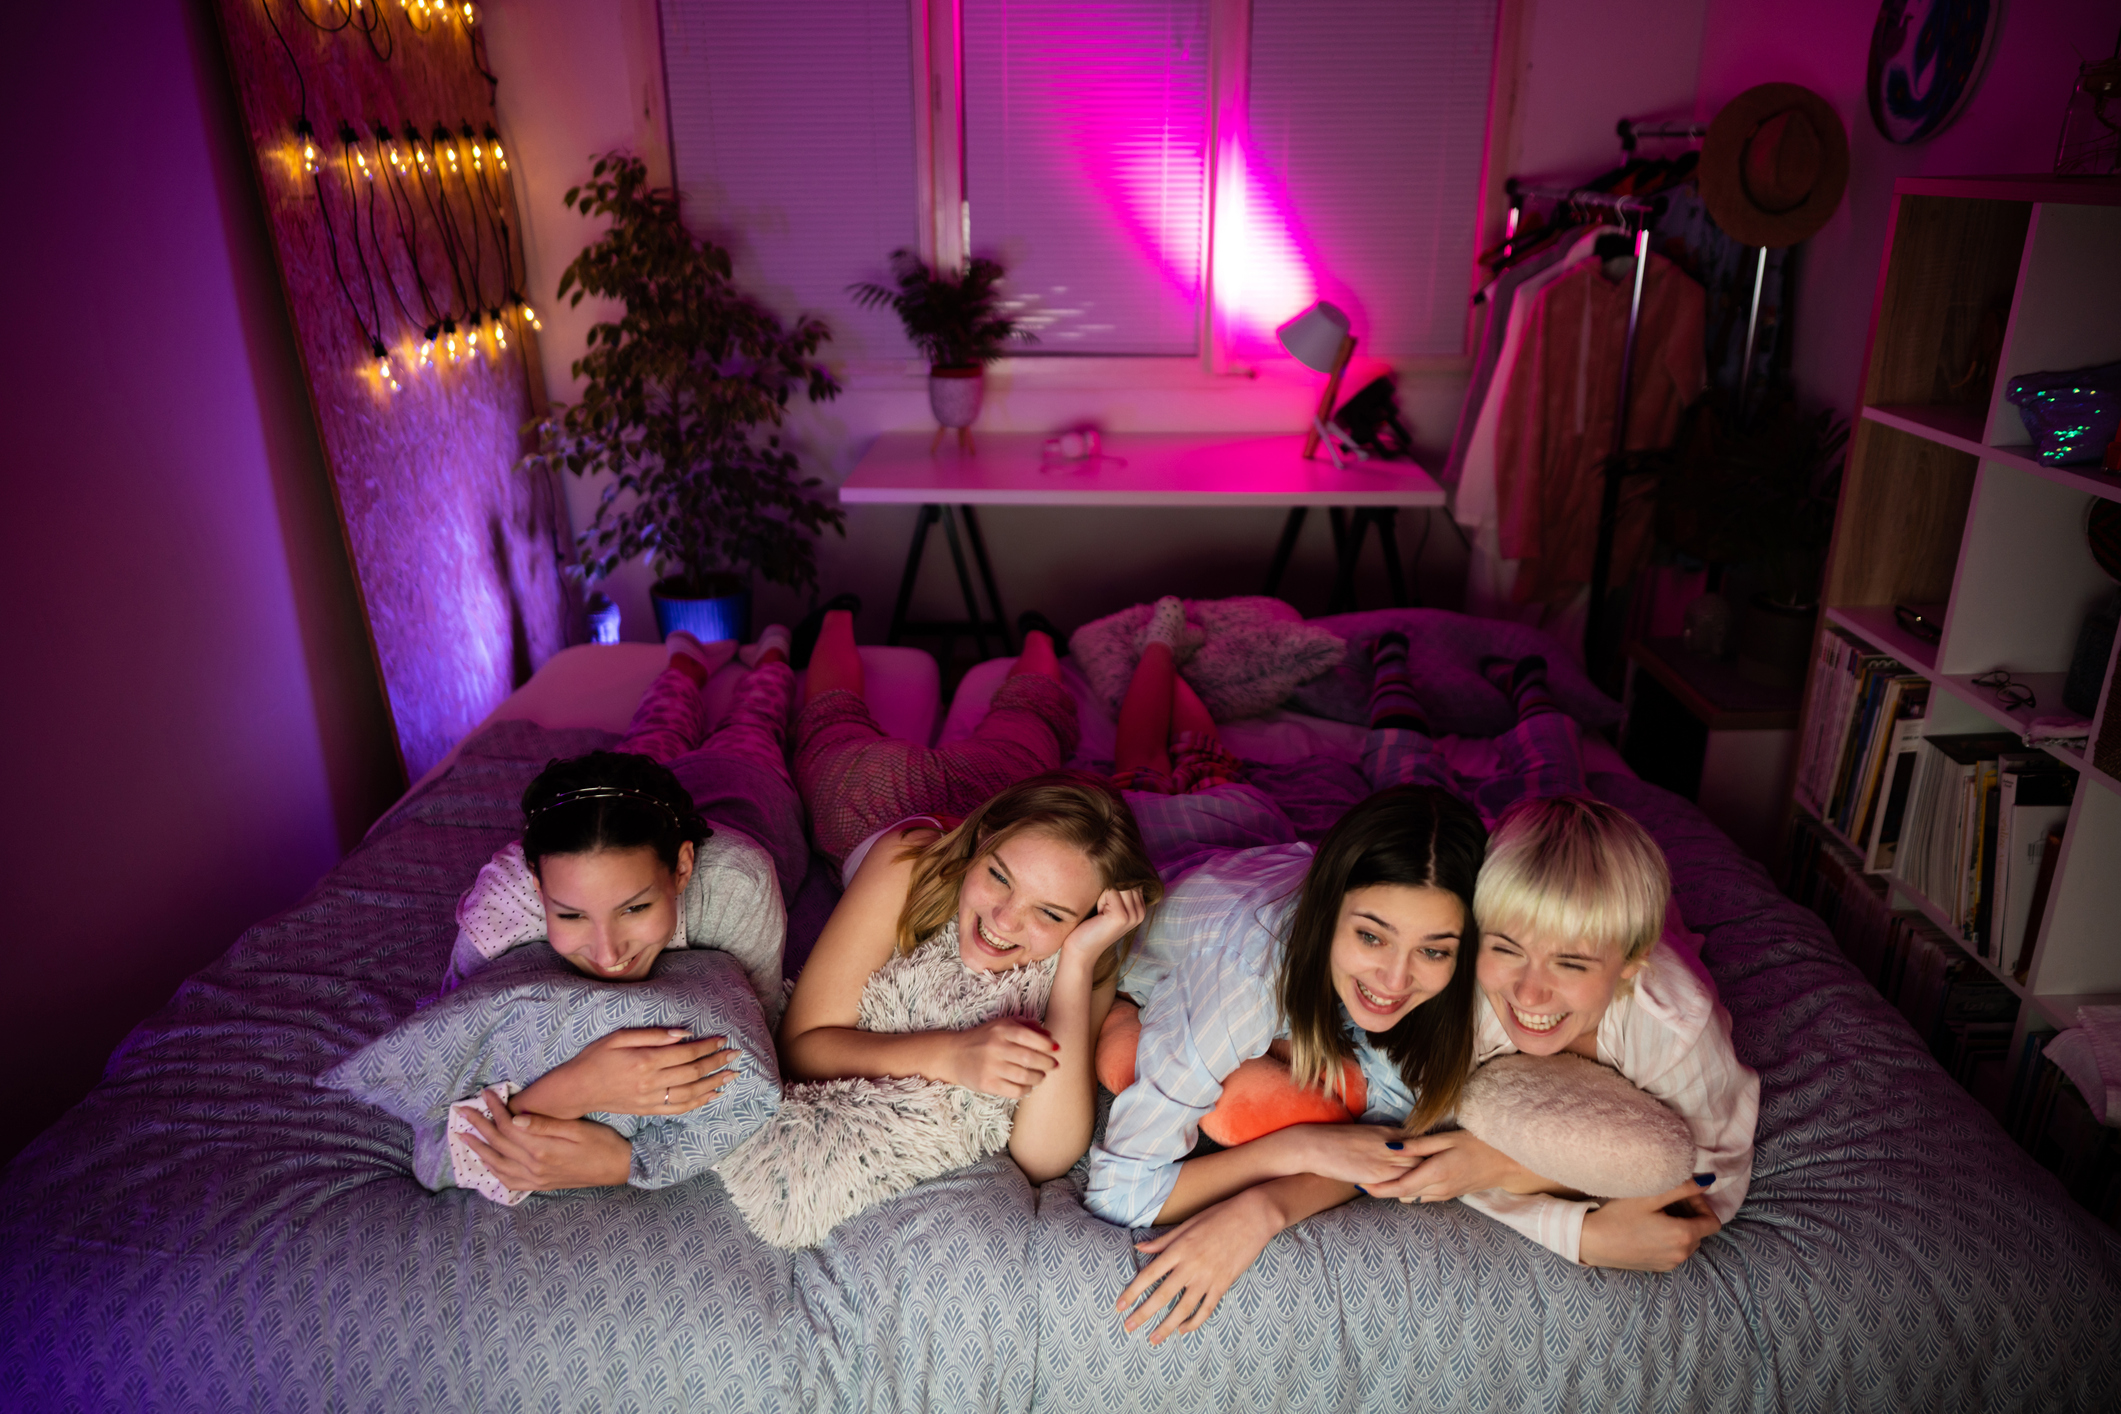 christina adams smith recommends Sleepover Movie Free Online